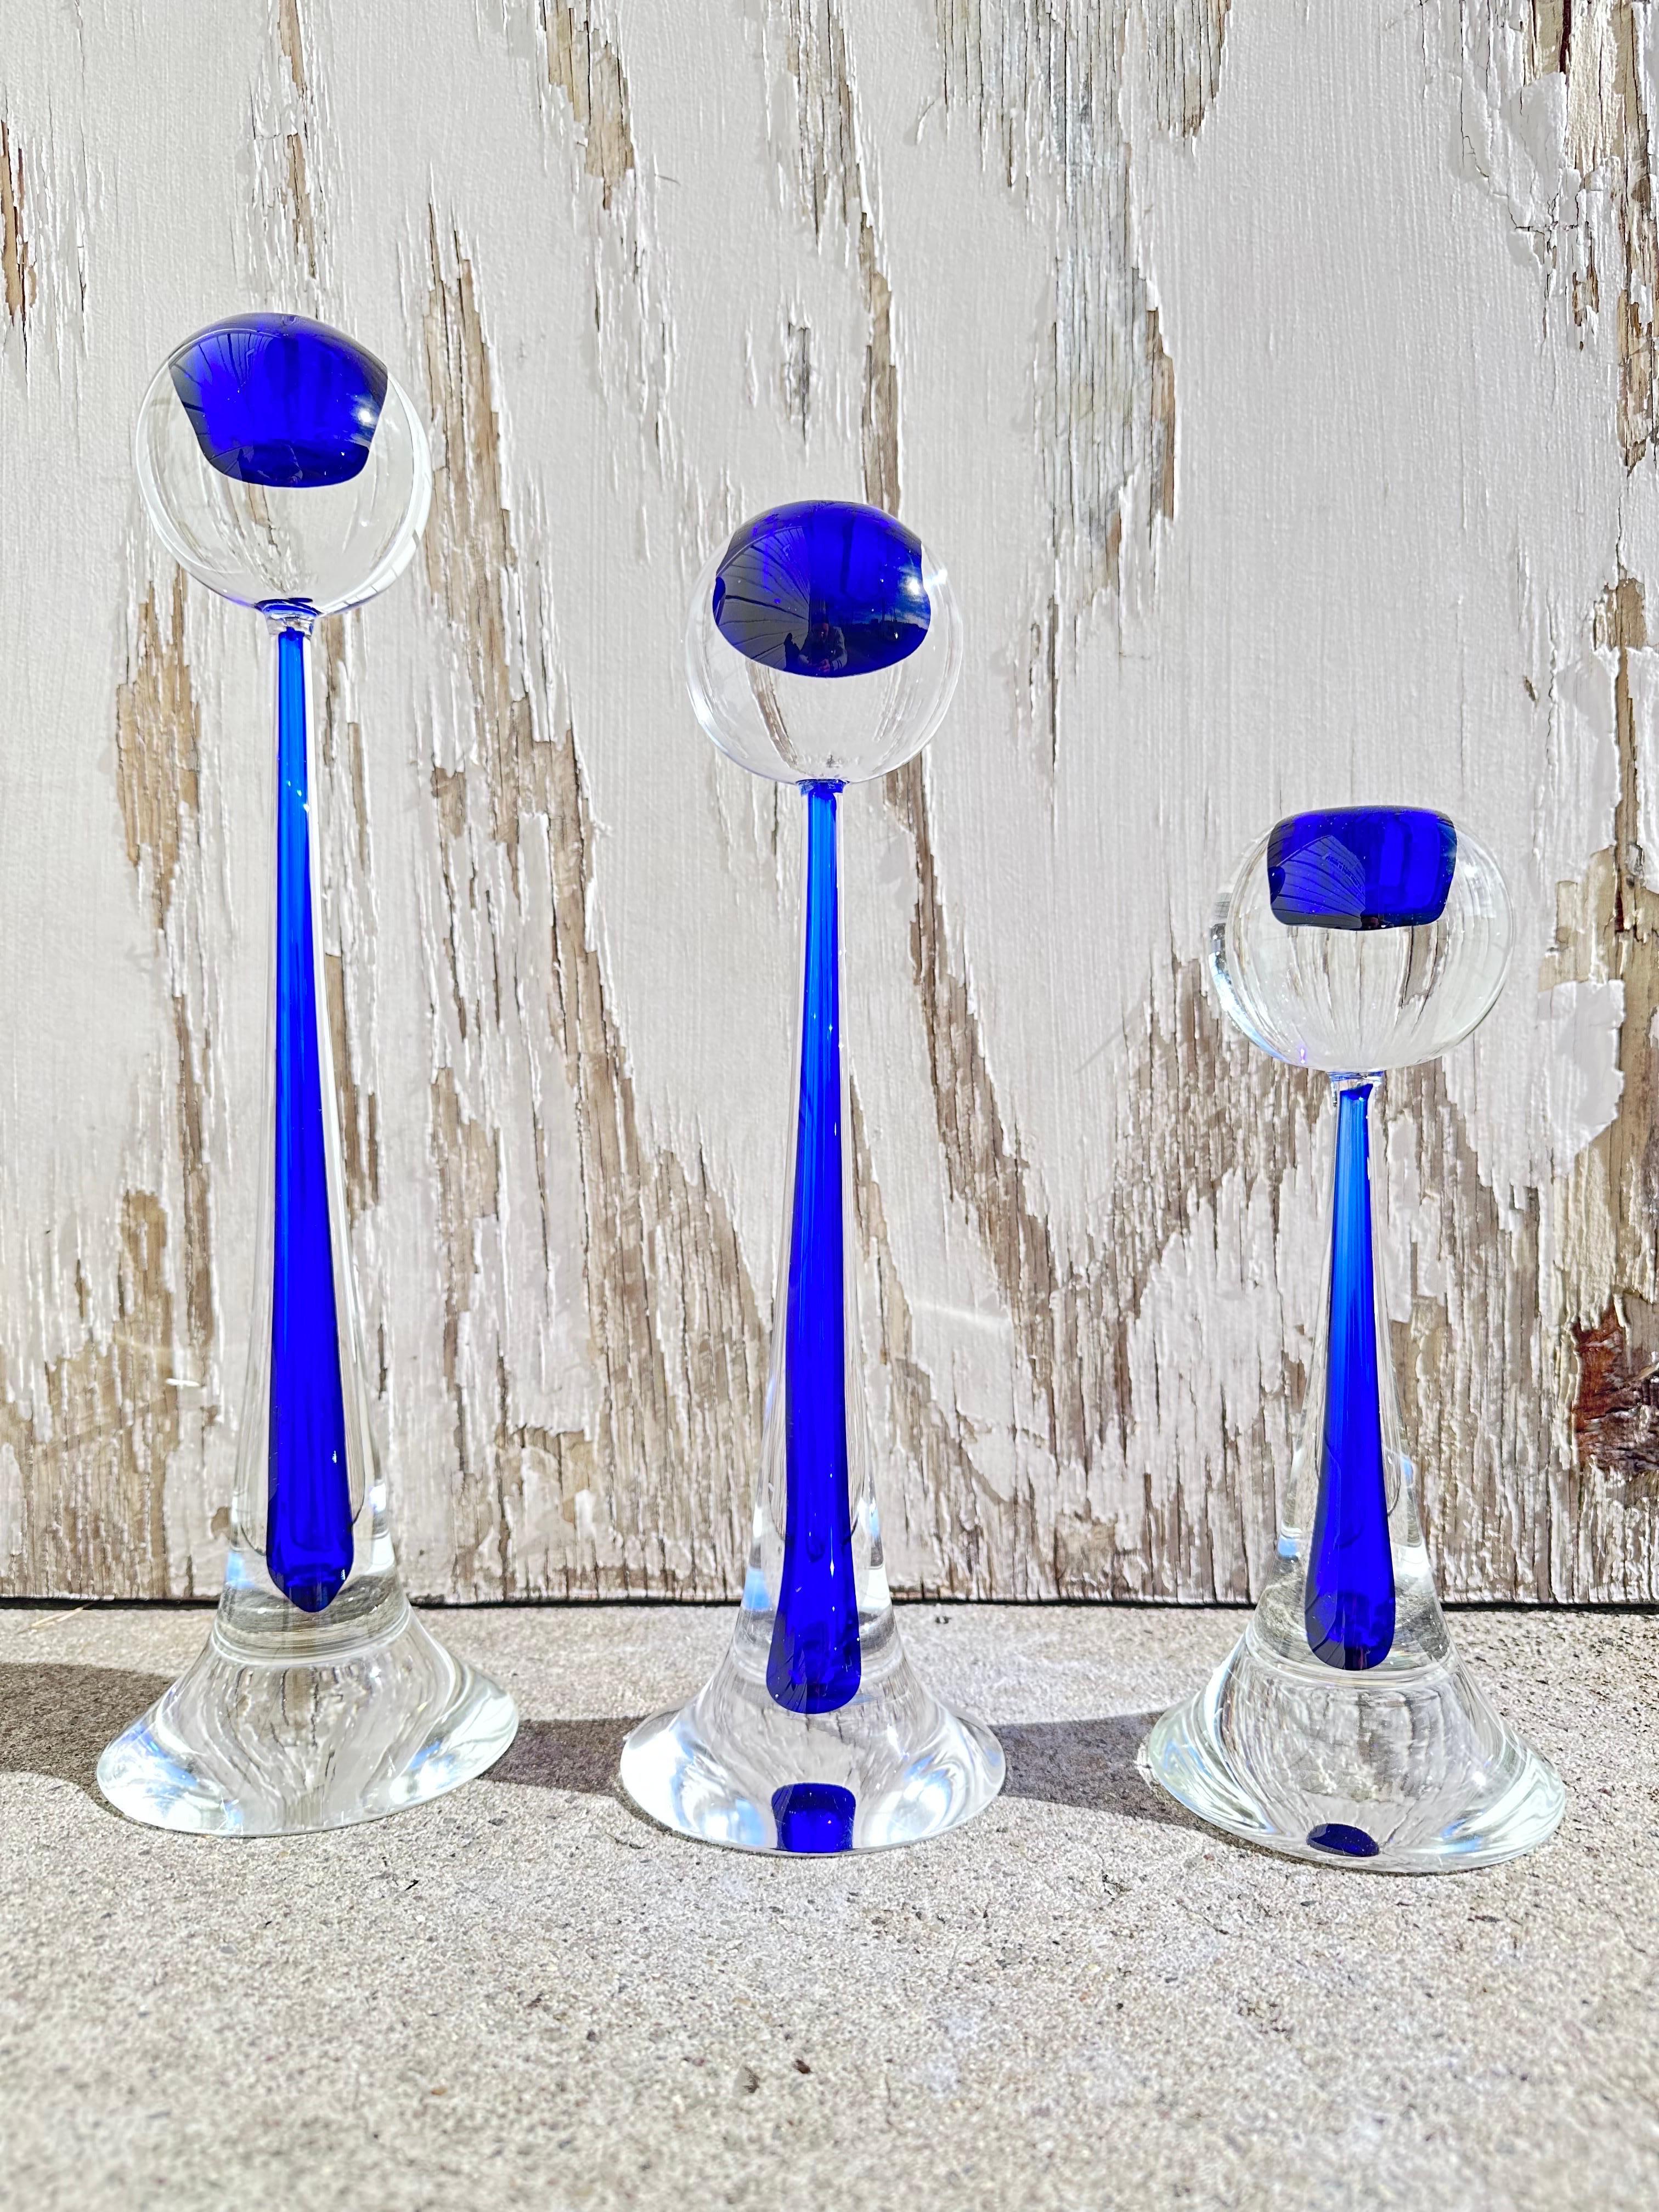 A Set of three stunning midcentury Modernist hand blown Murano glass candlesticks signed by Cenedese. These candlesticks feature a tapered teardrop design made of hand blown Murano glass. Each candlesticks form features a spherical topper that is